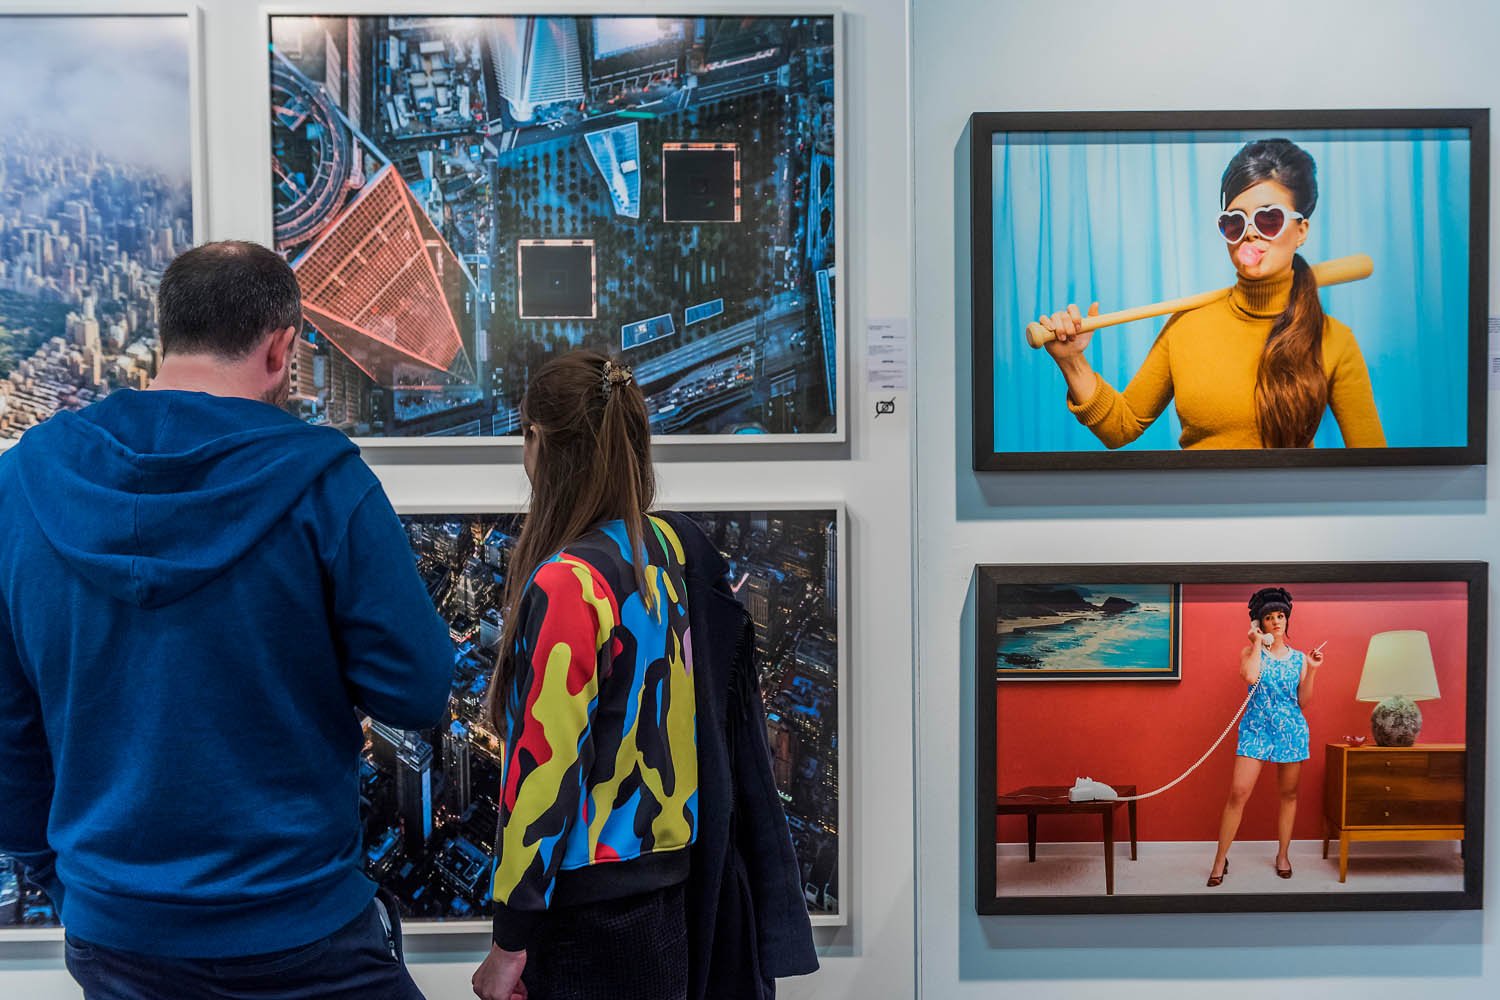 The Affordable Art Fair opens in Battersea and runs until 22 October. The fair offers visitors a chance to purchase work from over 110 galleries at prices between £100 and £6,000